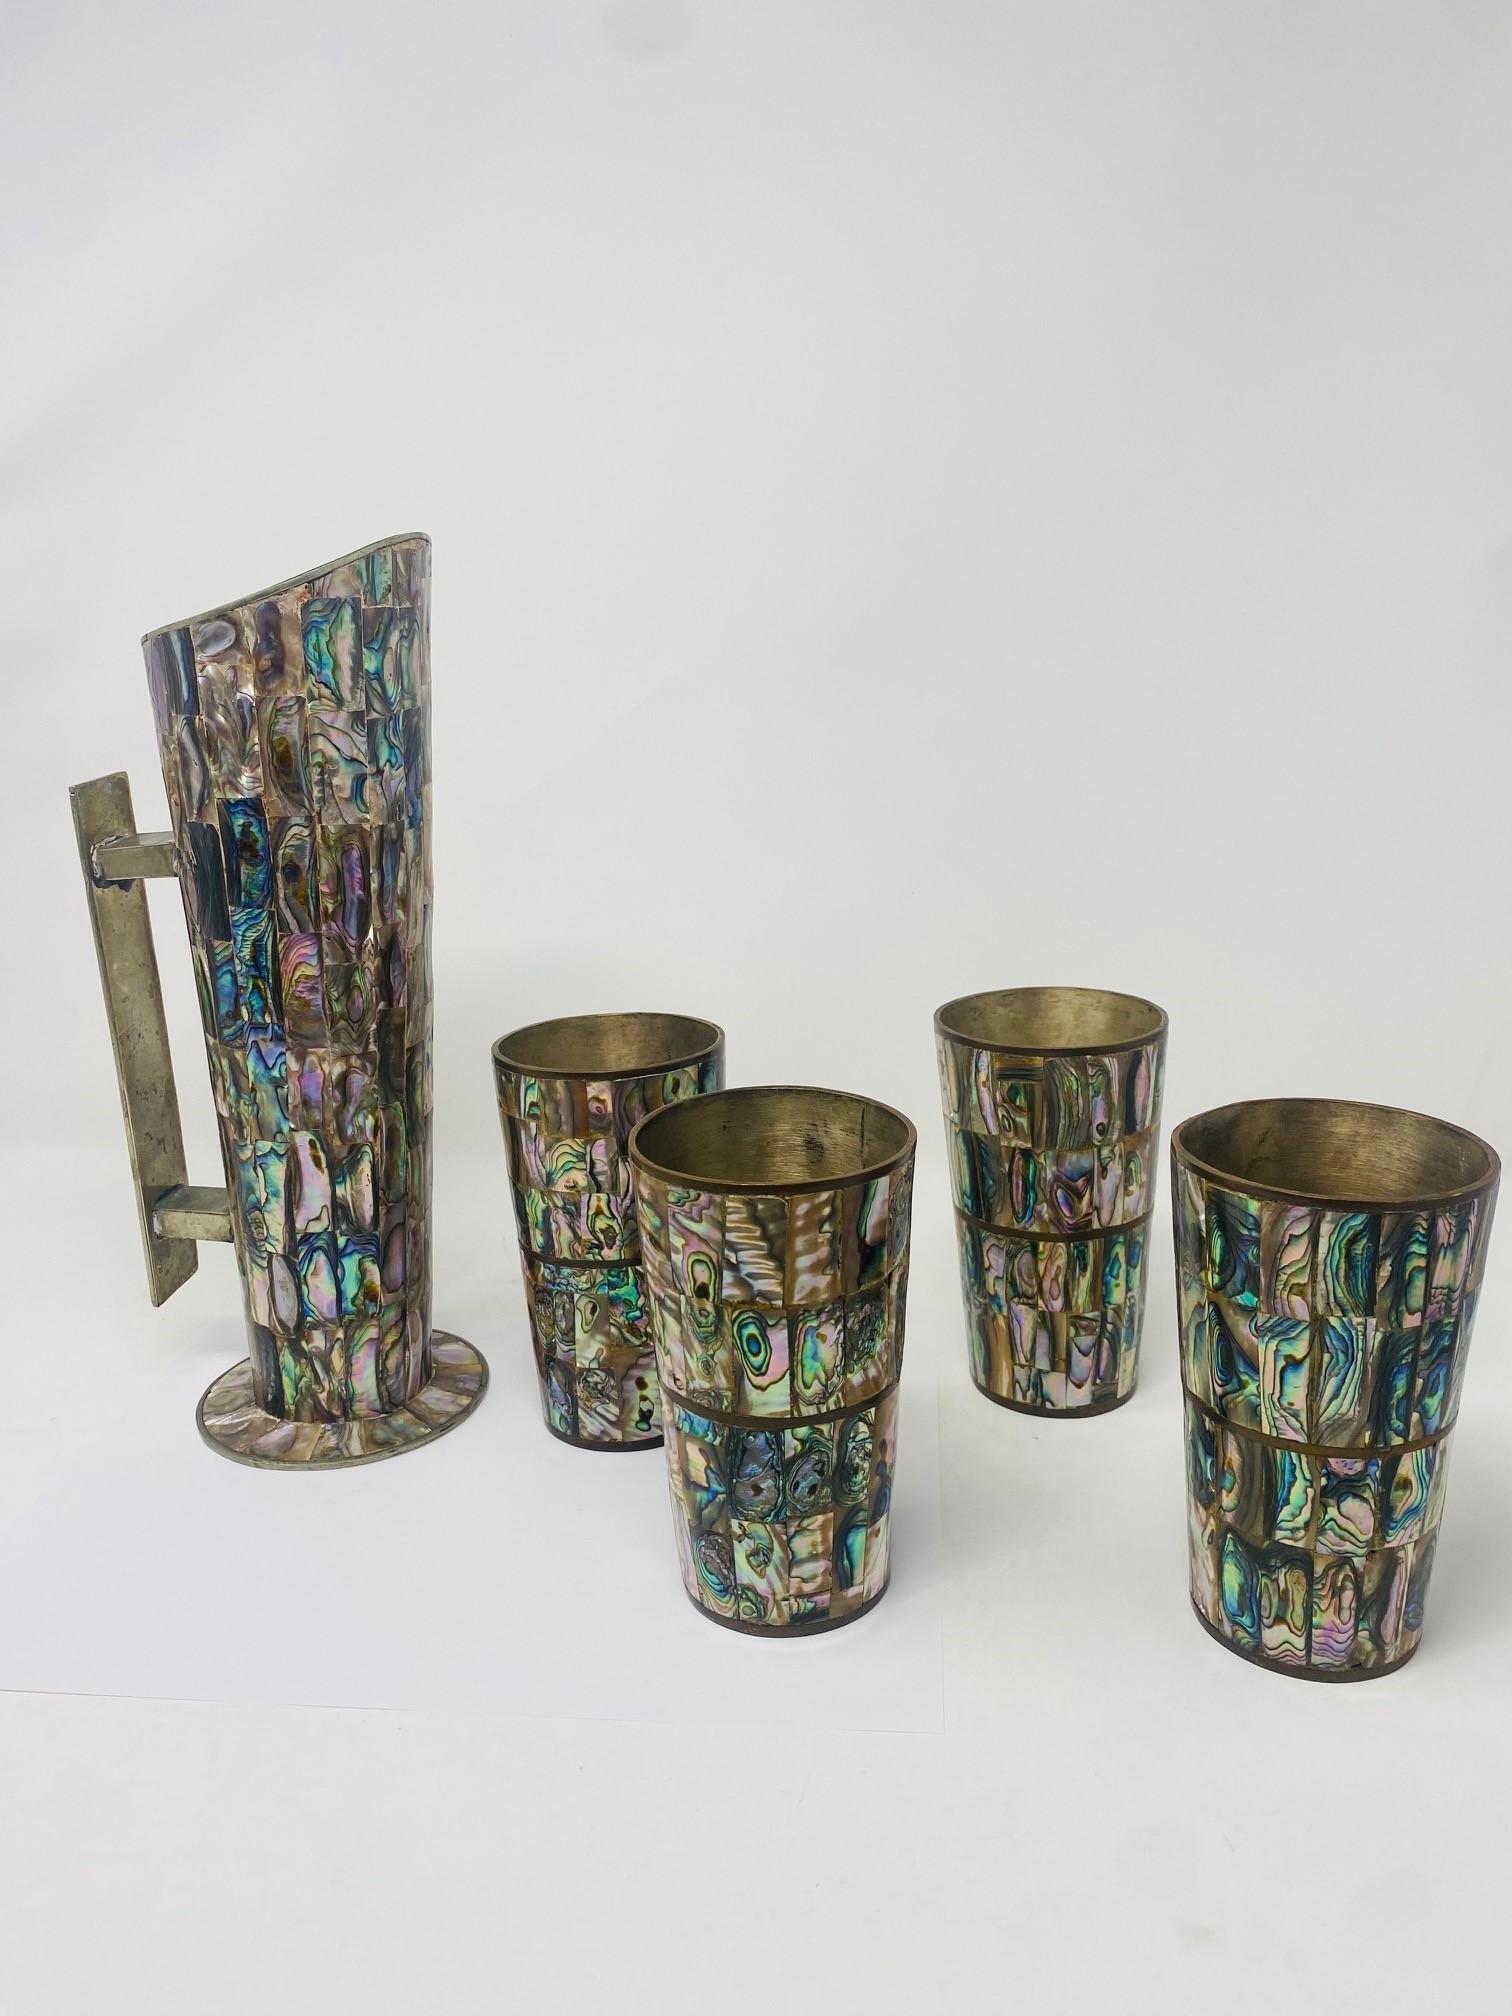 Los Castillo pitcher with beautiful abalone shell and matching set of abalone shell cups. Marked Alpaca Taxco. In great vintage condition.  This beautiful set is beyond fabulous.  Sculptural and organic, each piece glistens with beauty.  An